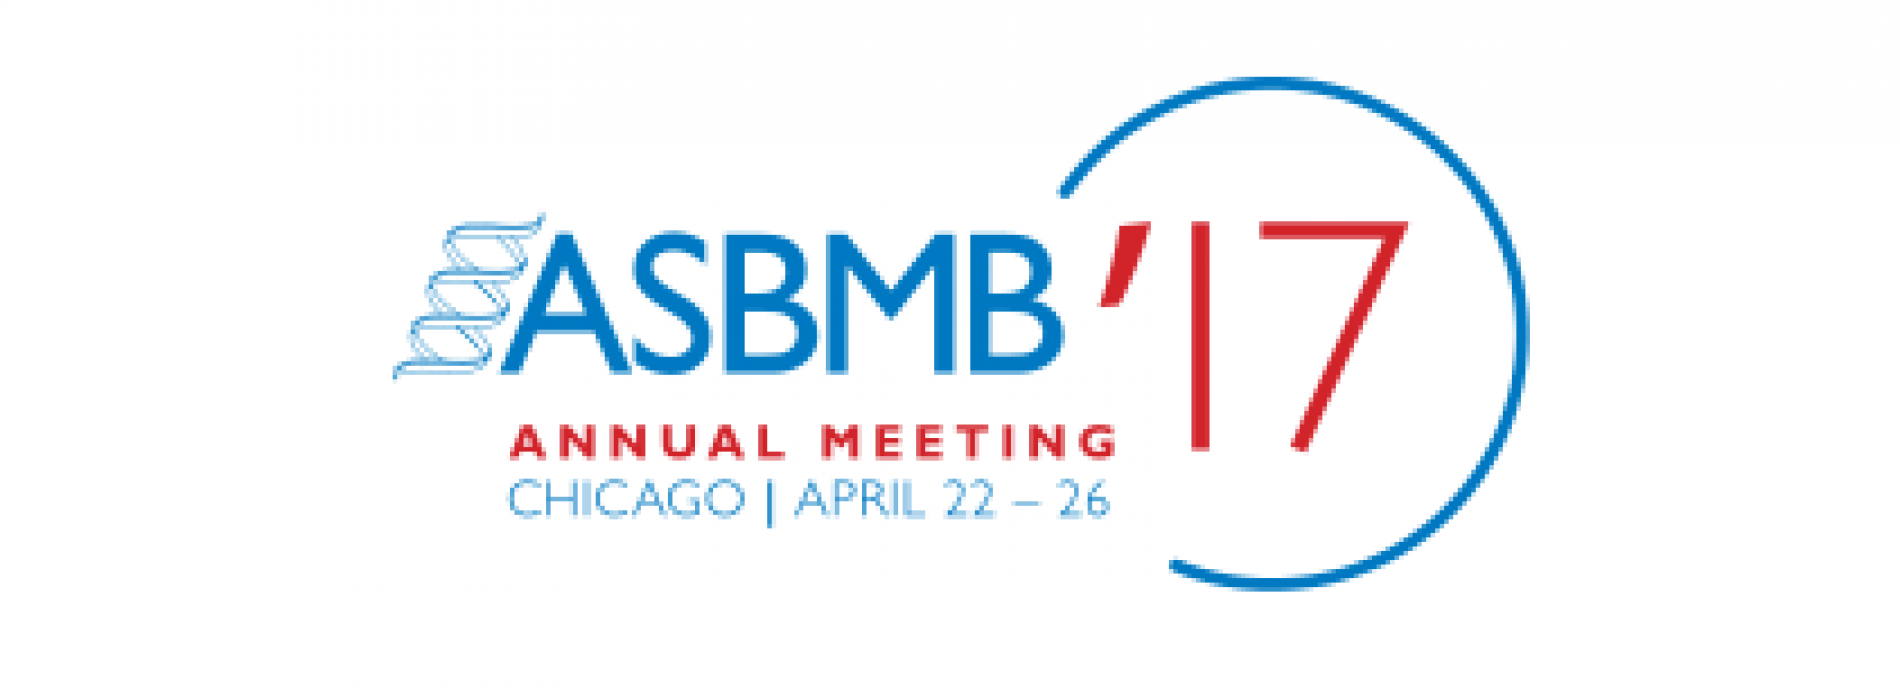 A Message from ASBMB’s President